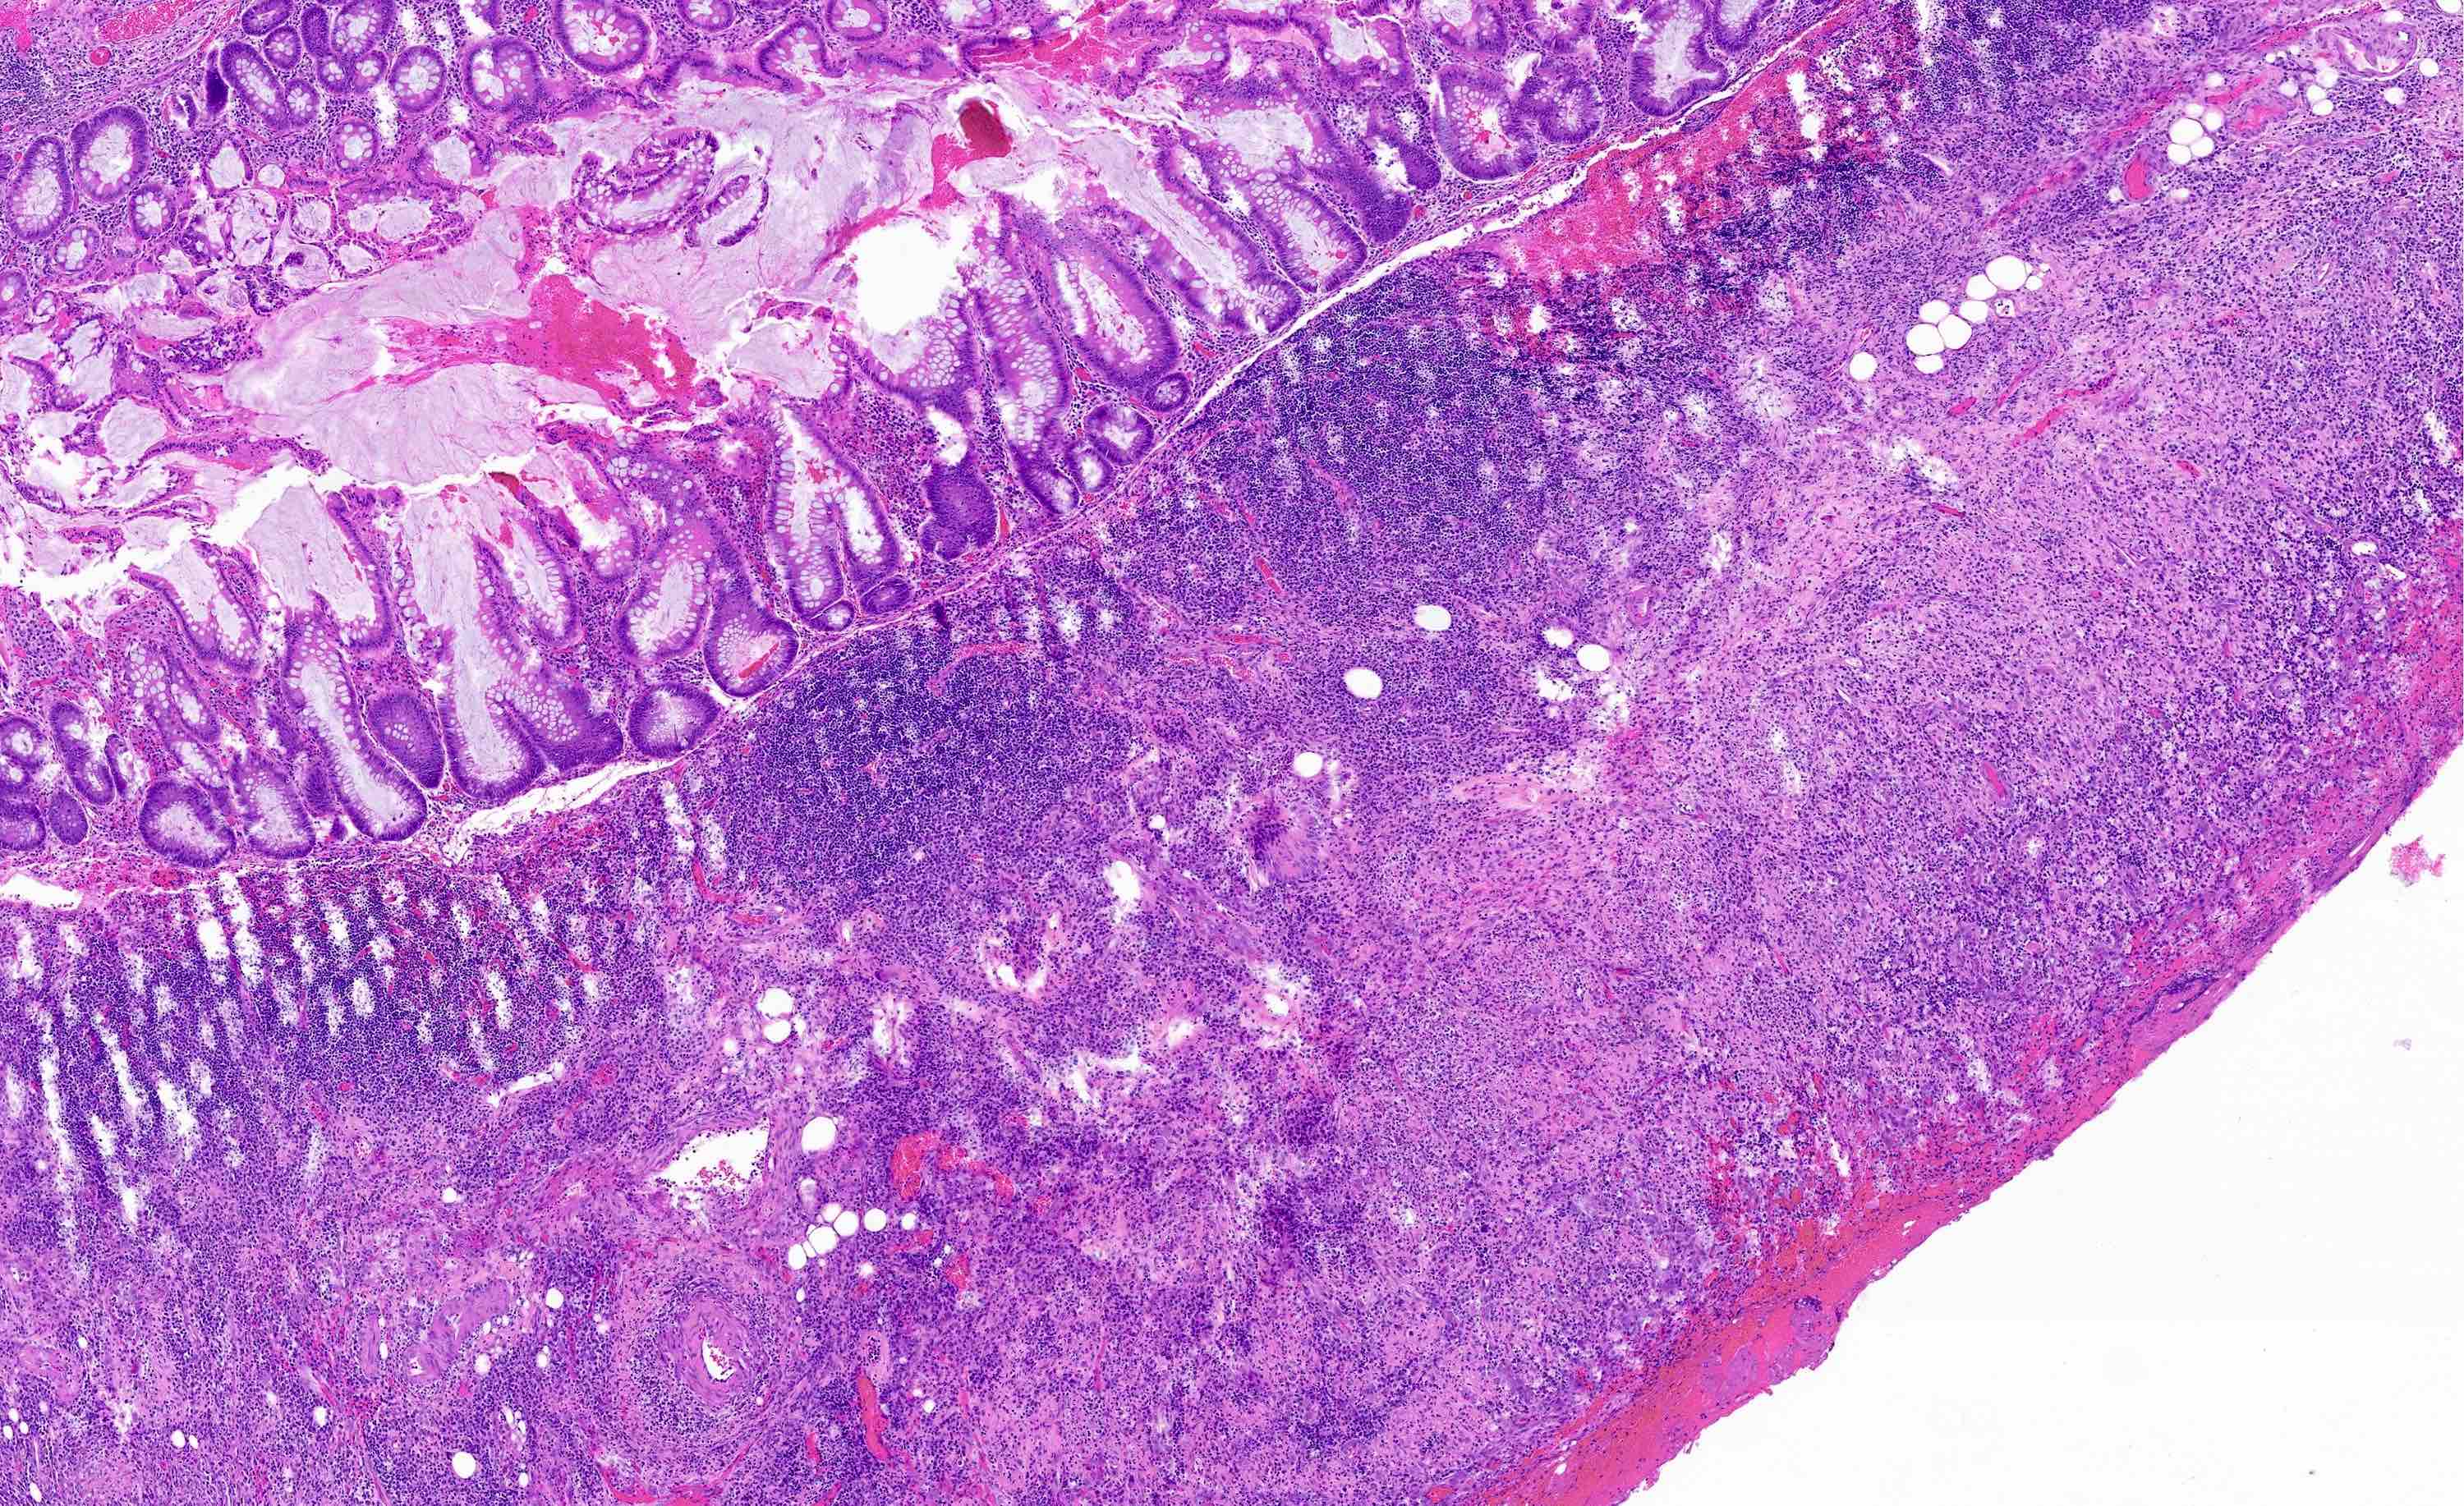 Transmural mixed inflammatory infiltrate